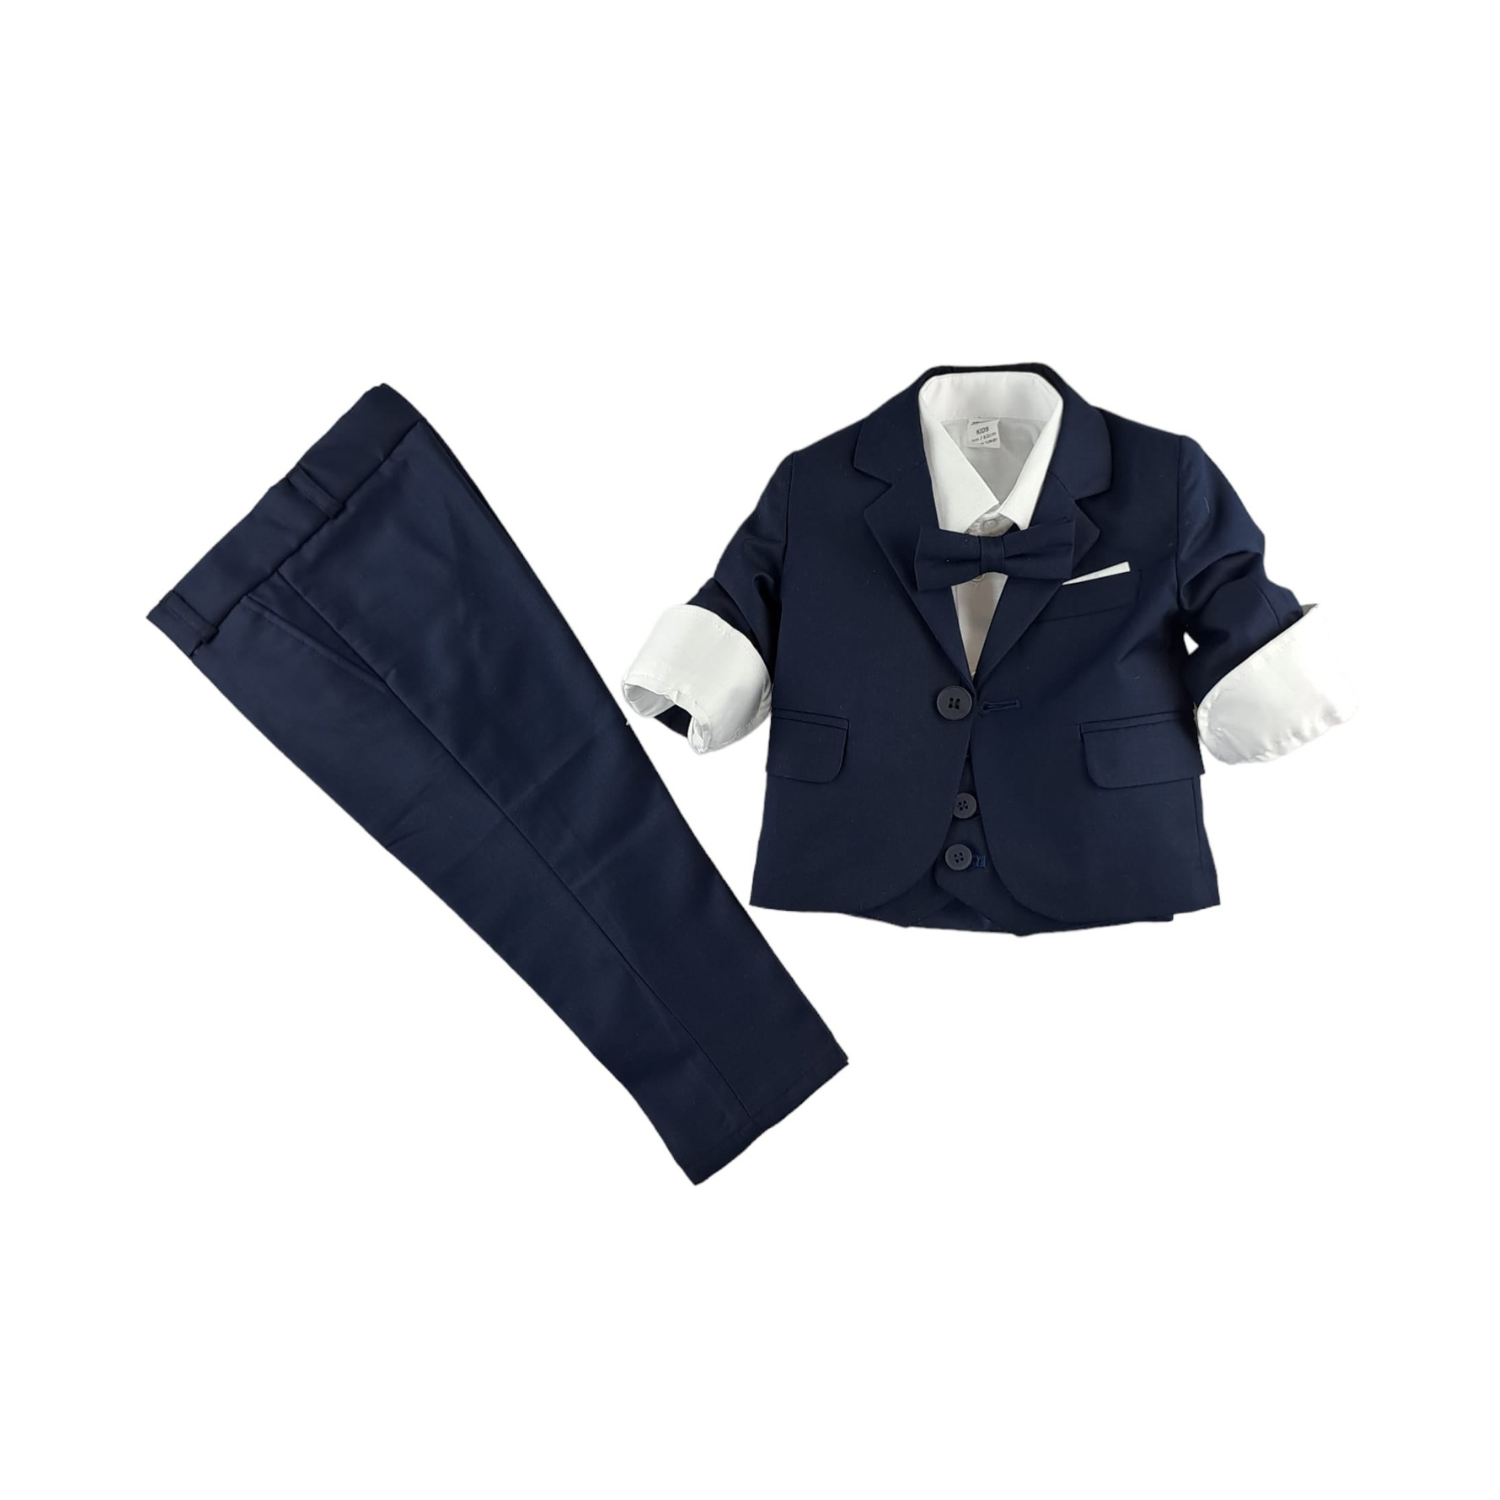 The Baby Groom Formal Boys Suit